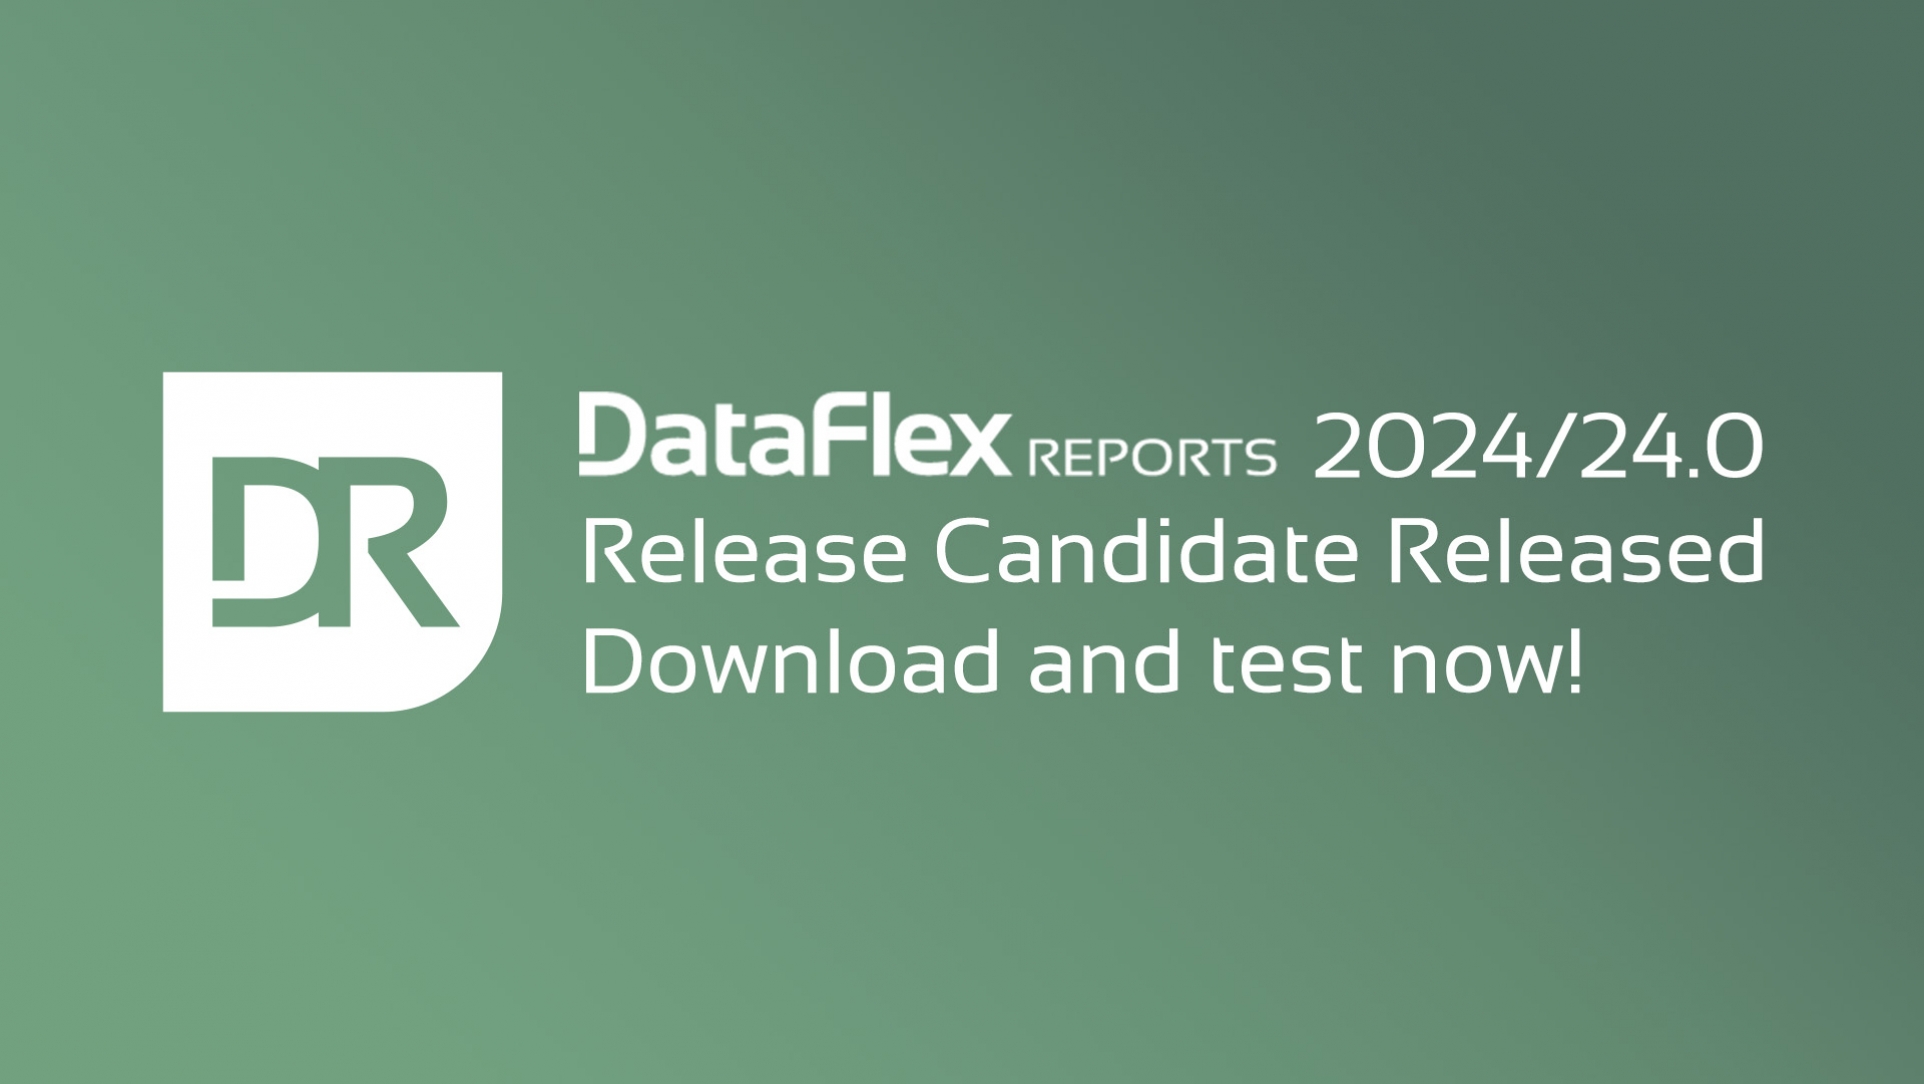 Download and test the DataFlex Reports 2024 Release Candidate!